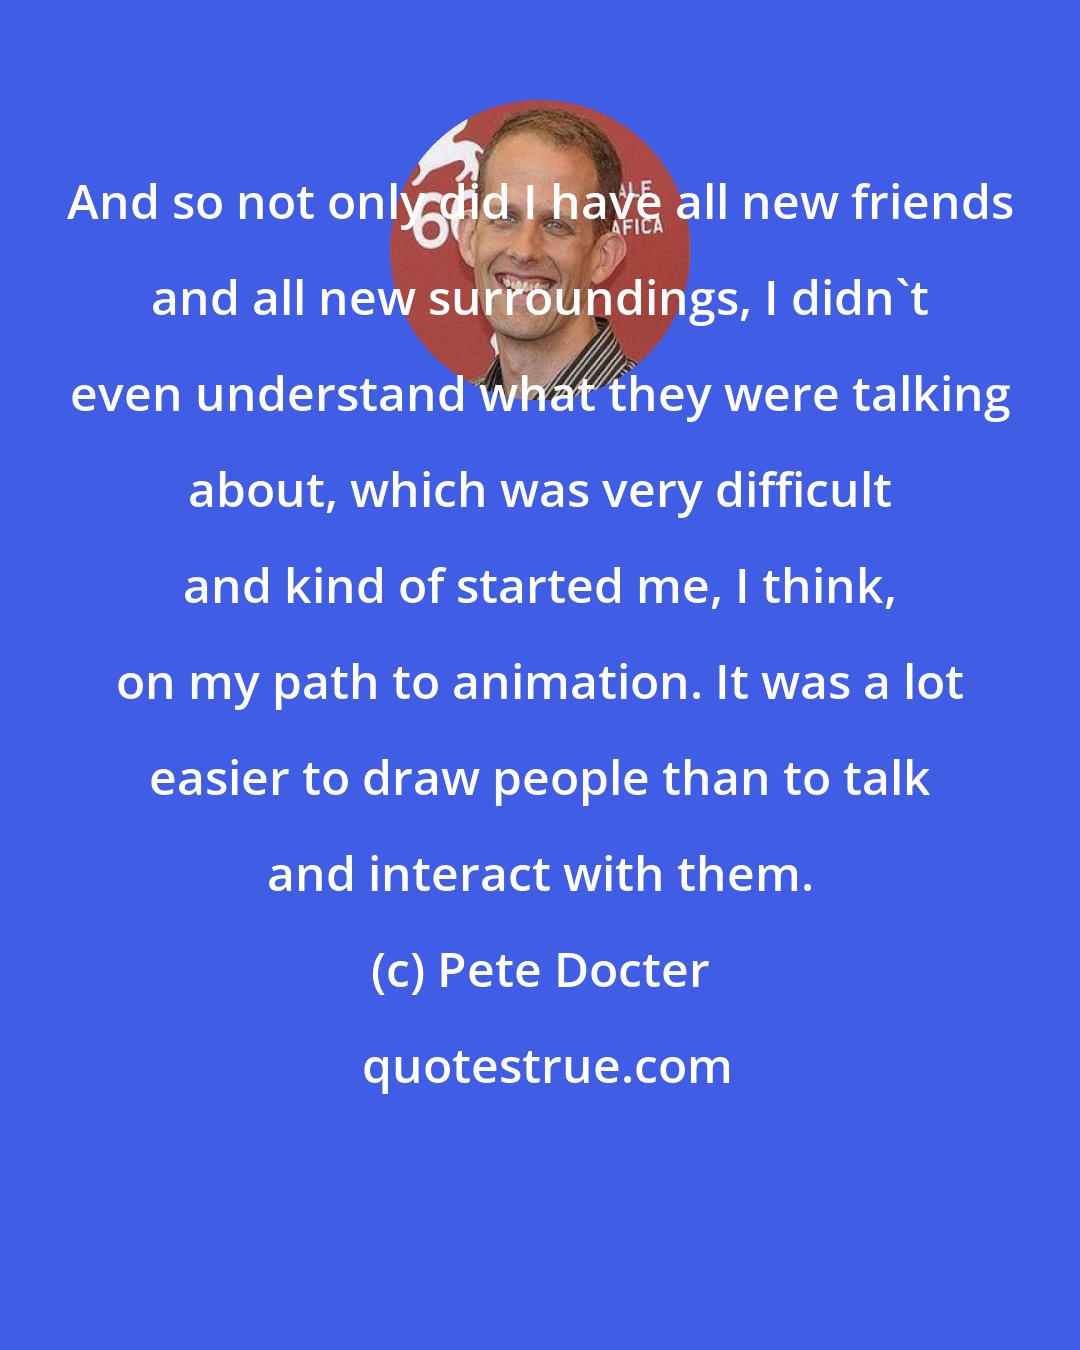 Pete Docter: And so not only did I have all new friends and all new surroundings, I didn't even understand what they were talking about, which was very difficult and kind of started me, I think, on my path to animation. It was a lot easier to draw people than to talk and interact with them.